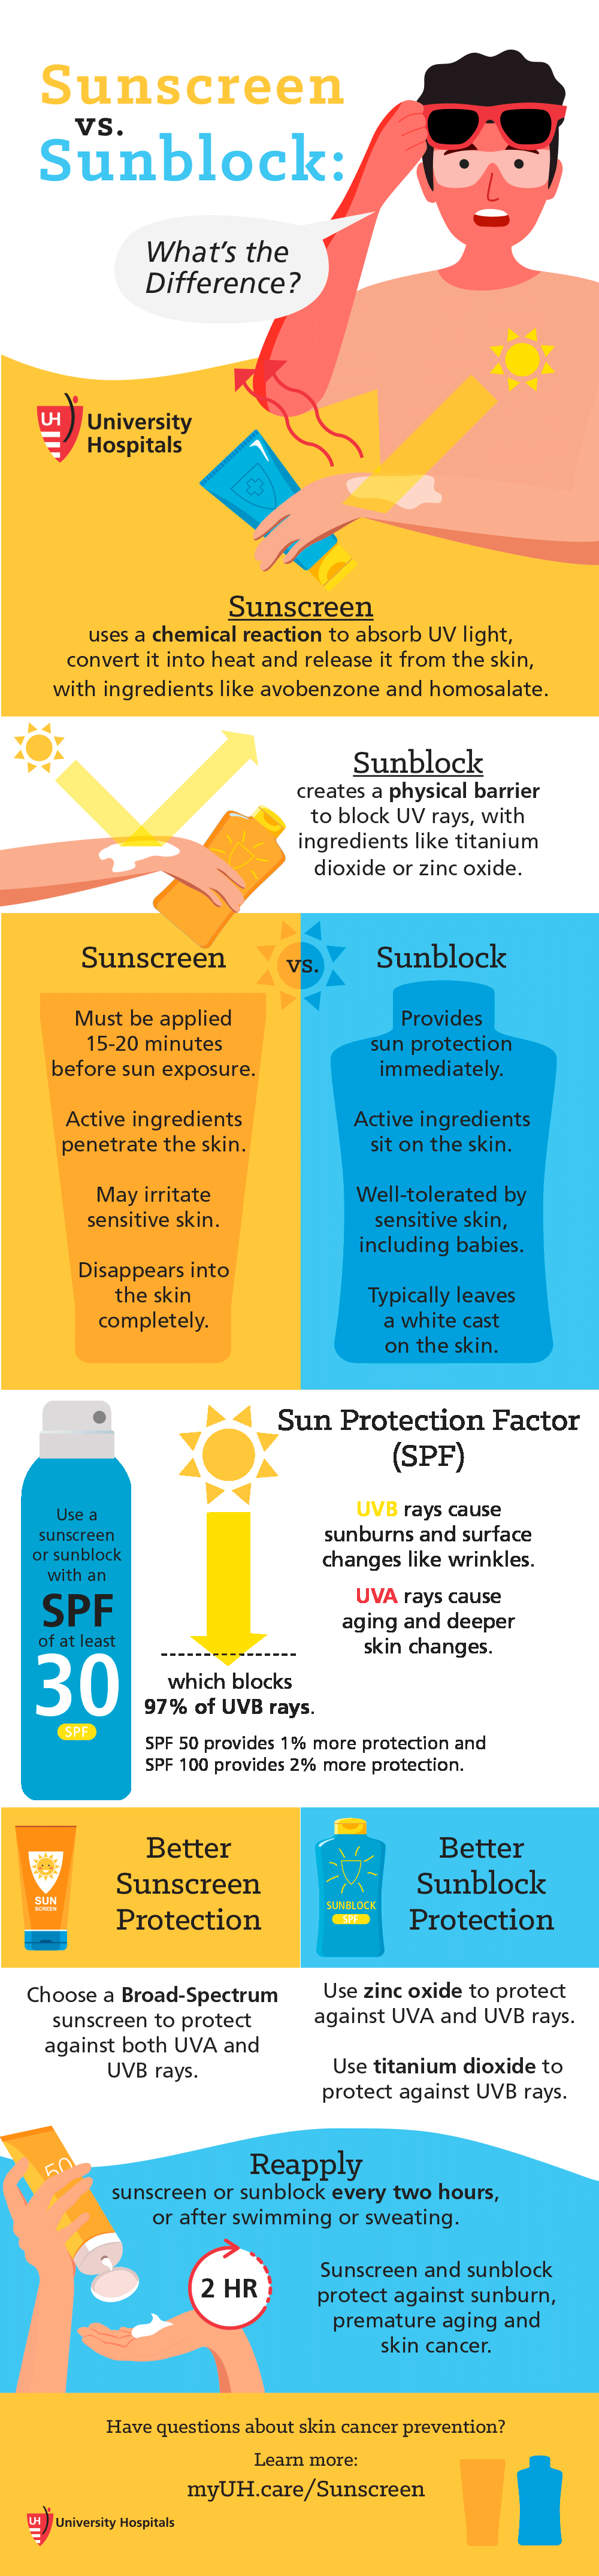 Infographic: Sunscreen vs. Sunblock: What's the Difference?